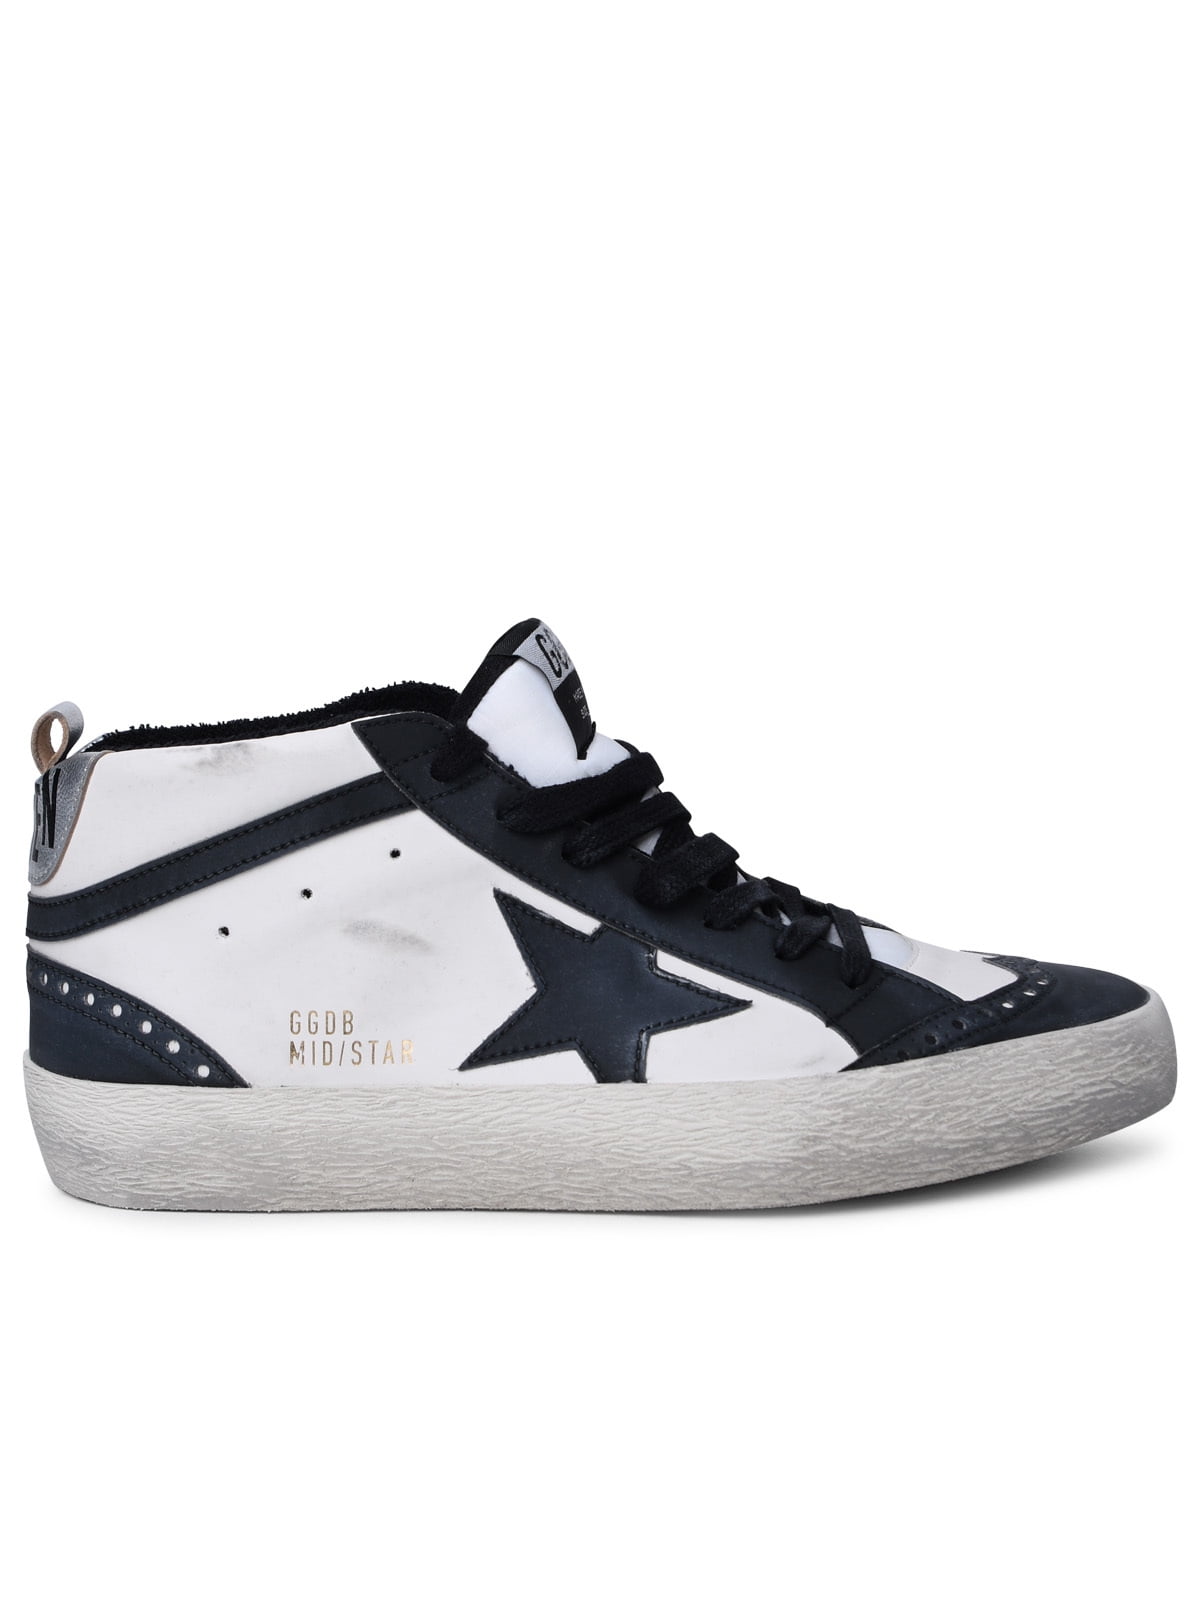 Golden Goose Man Golden Goose 'Mid-Star Classic' White Leather Sneakers ...